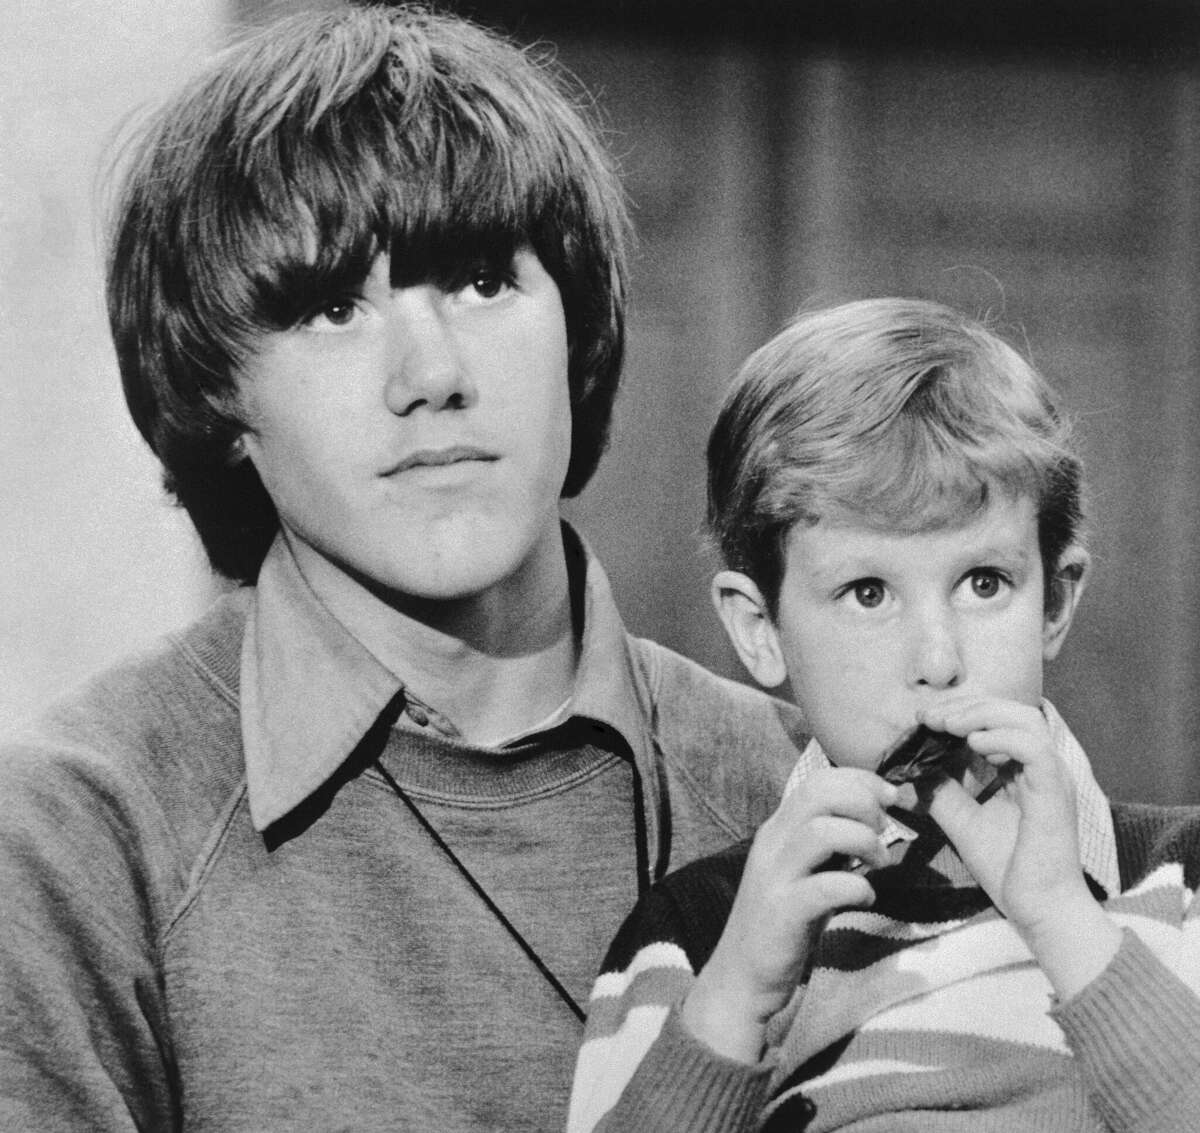 Timmy White, 5, sits on the lap of Steven Stayner, 14, and tries to blow a balloon up during press conference after their rescue in 1980.